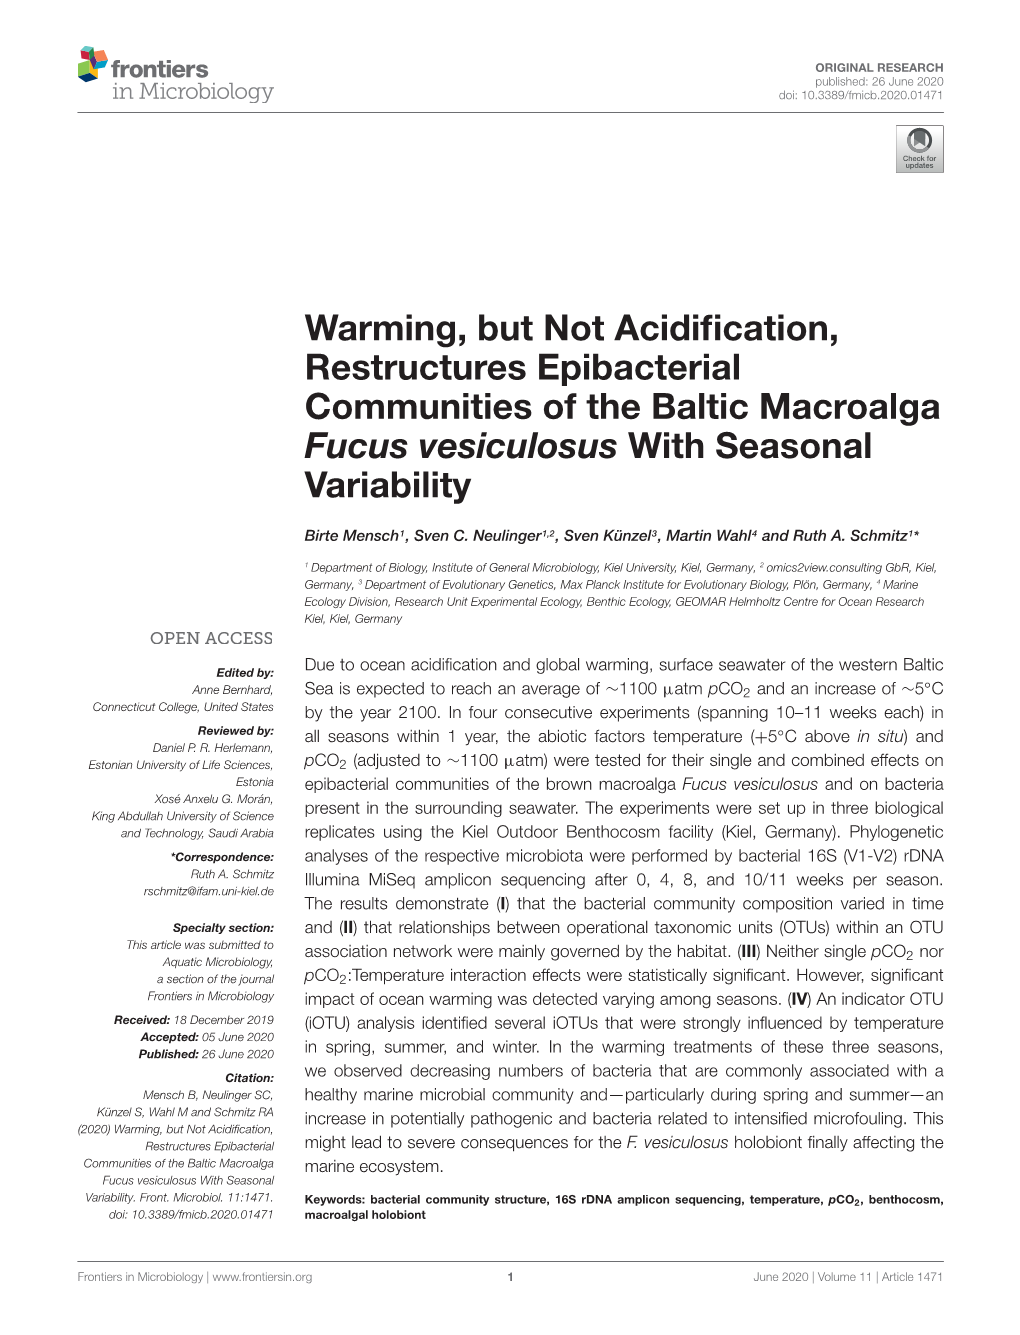 Warming, but Not Acidification, Restructures Epibacterial